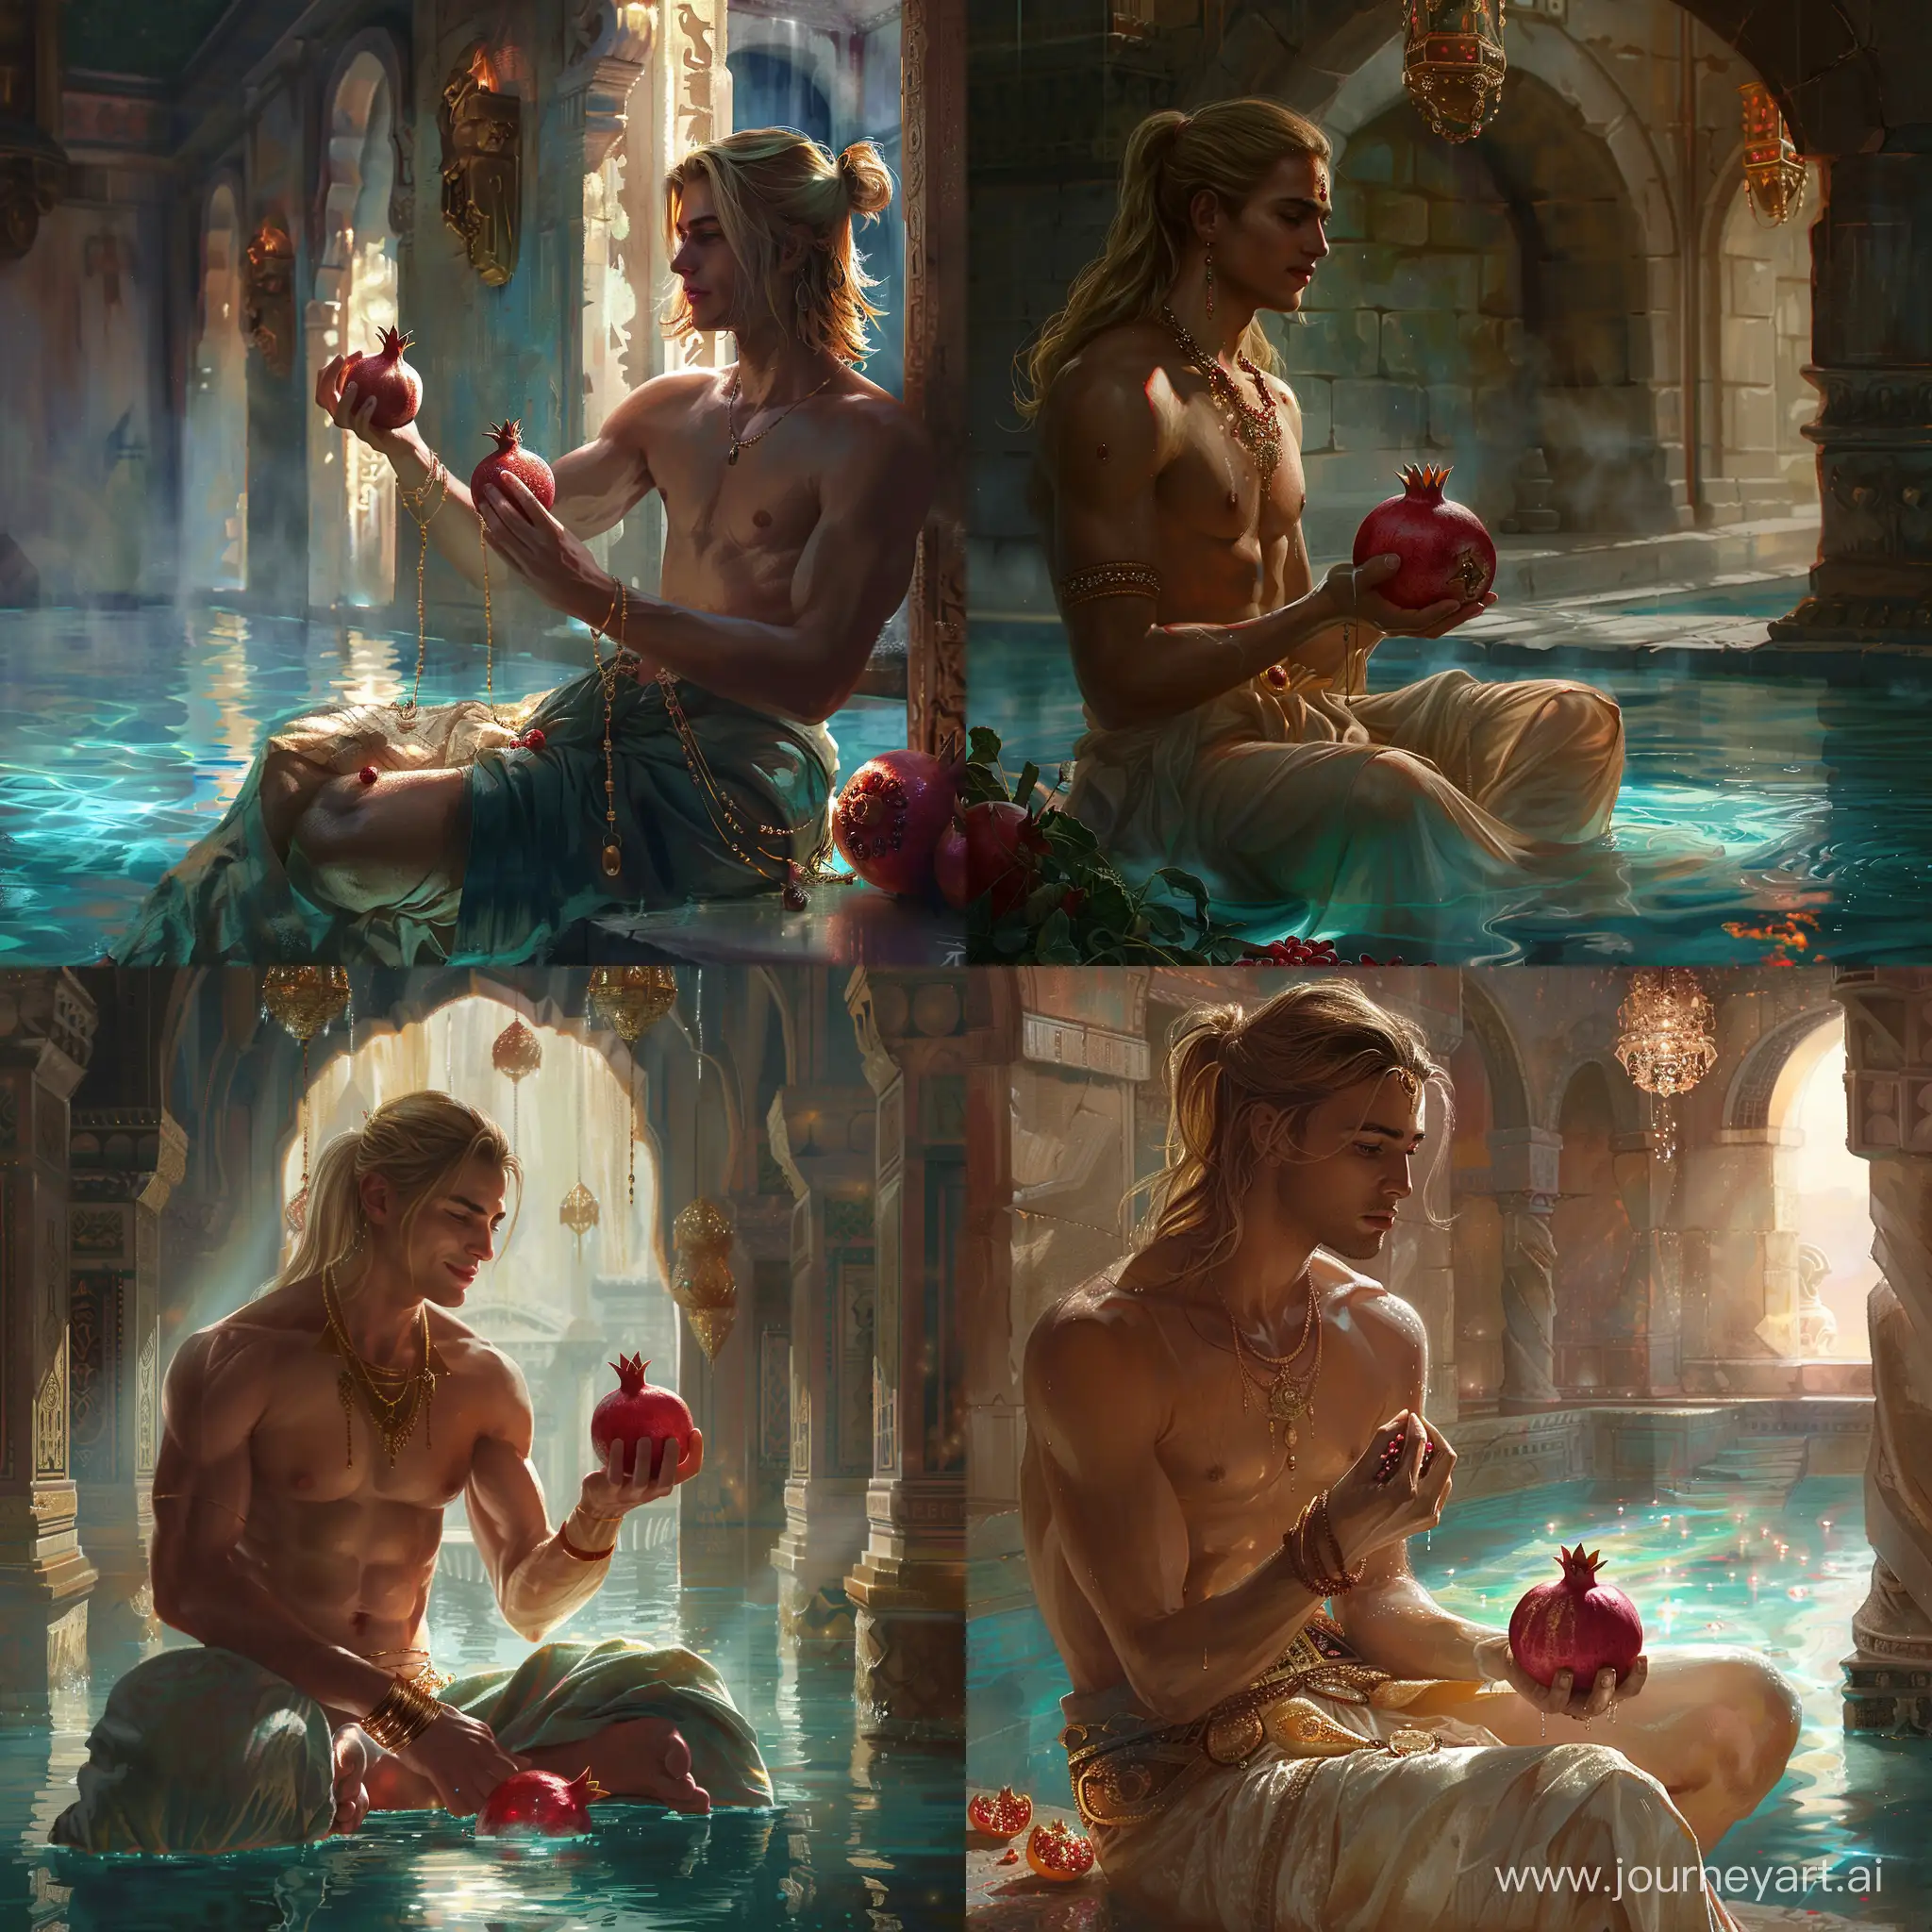 one man sitting down and holding a pomegrenate, perspective view, shirtless,graceful, belly dance clothes,danmei artstyle, semi realistic art, beautiful interior ancient pool architecture background, magical water glowing, fantasy background, magical glow, golden jewels, long luxurious blond hair ponytail, day light